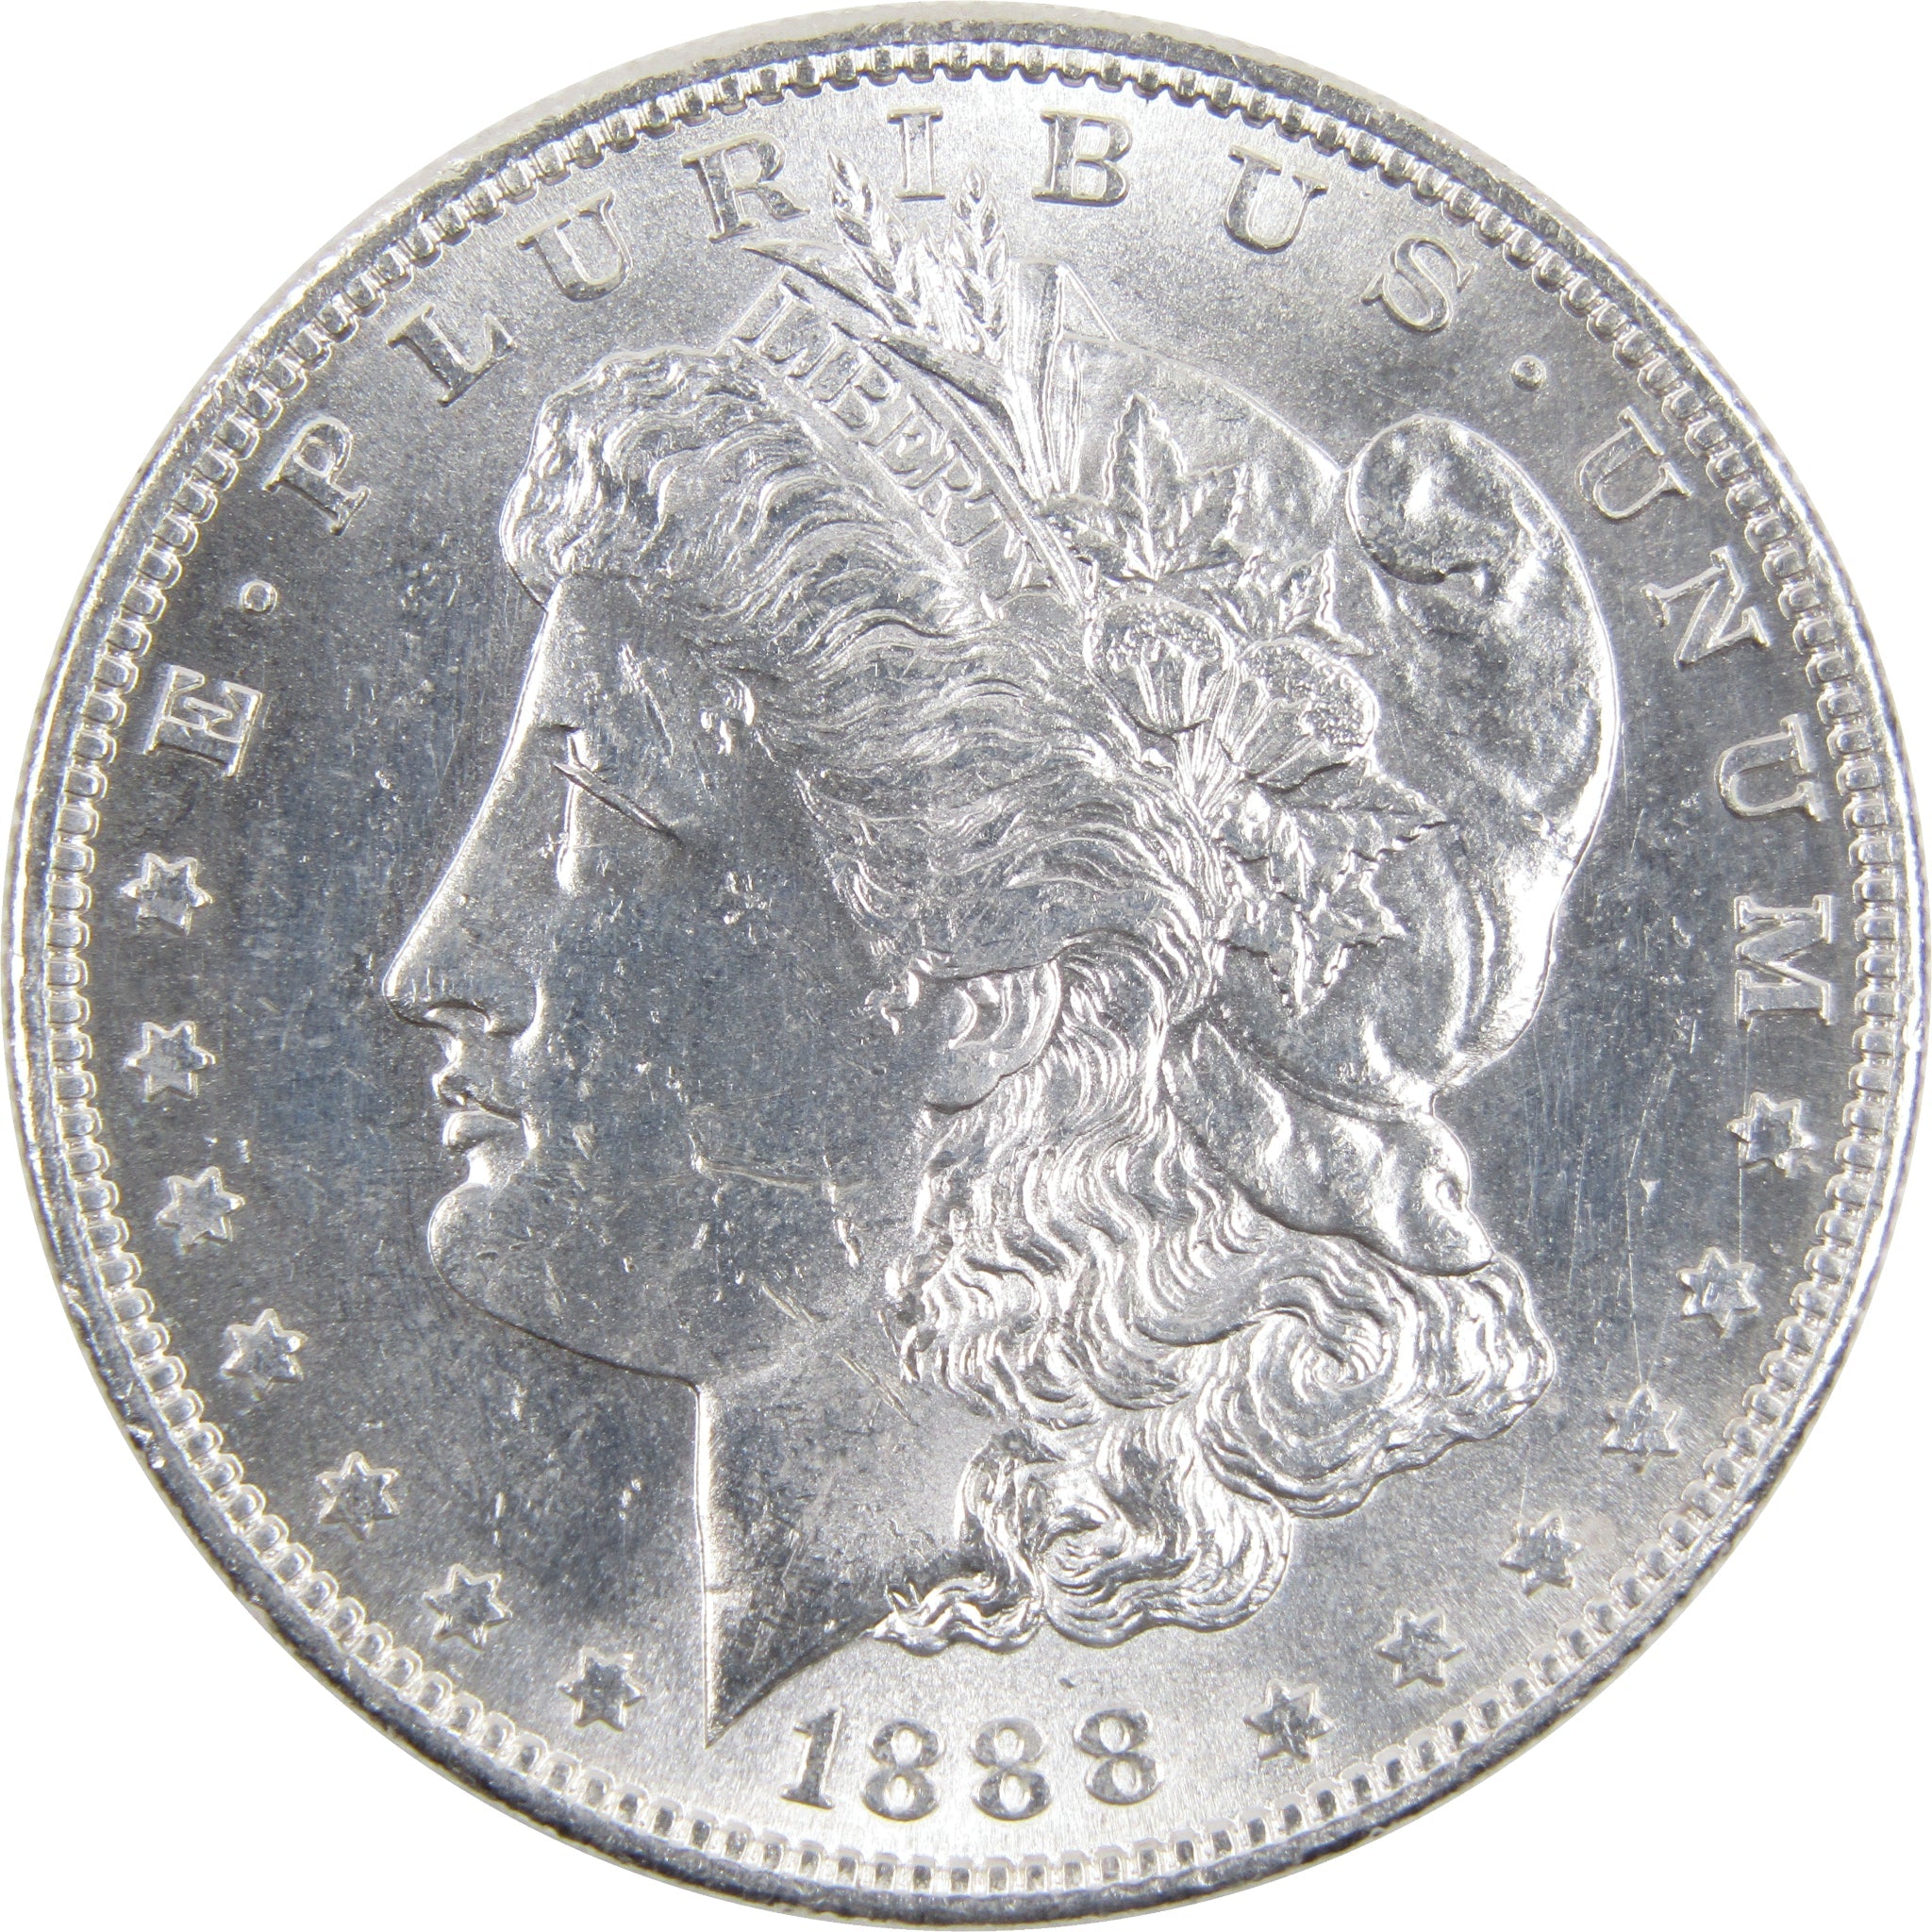 1888 S Morgan Dollar BU Uncirculated Mint State 90% Silver SKU:I2429 - Morgan coin - Morgan silver dollar - Morgan silver dollar for sale - Profile Coins &amp; Collectibles